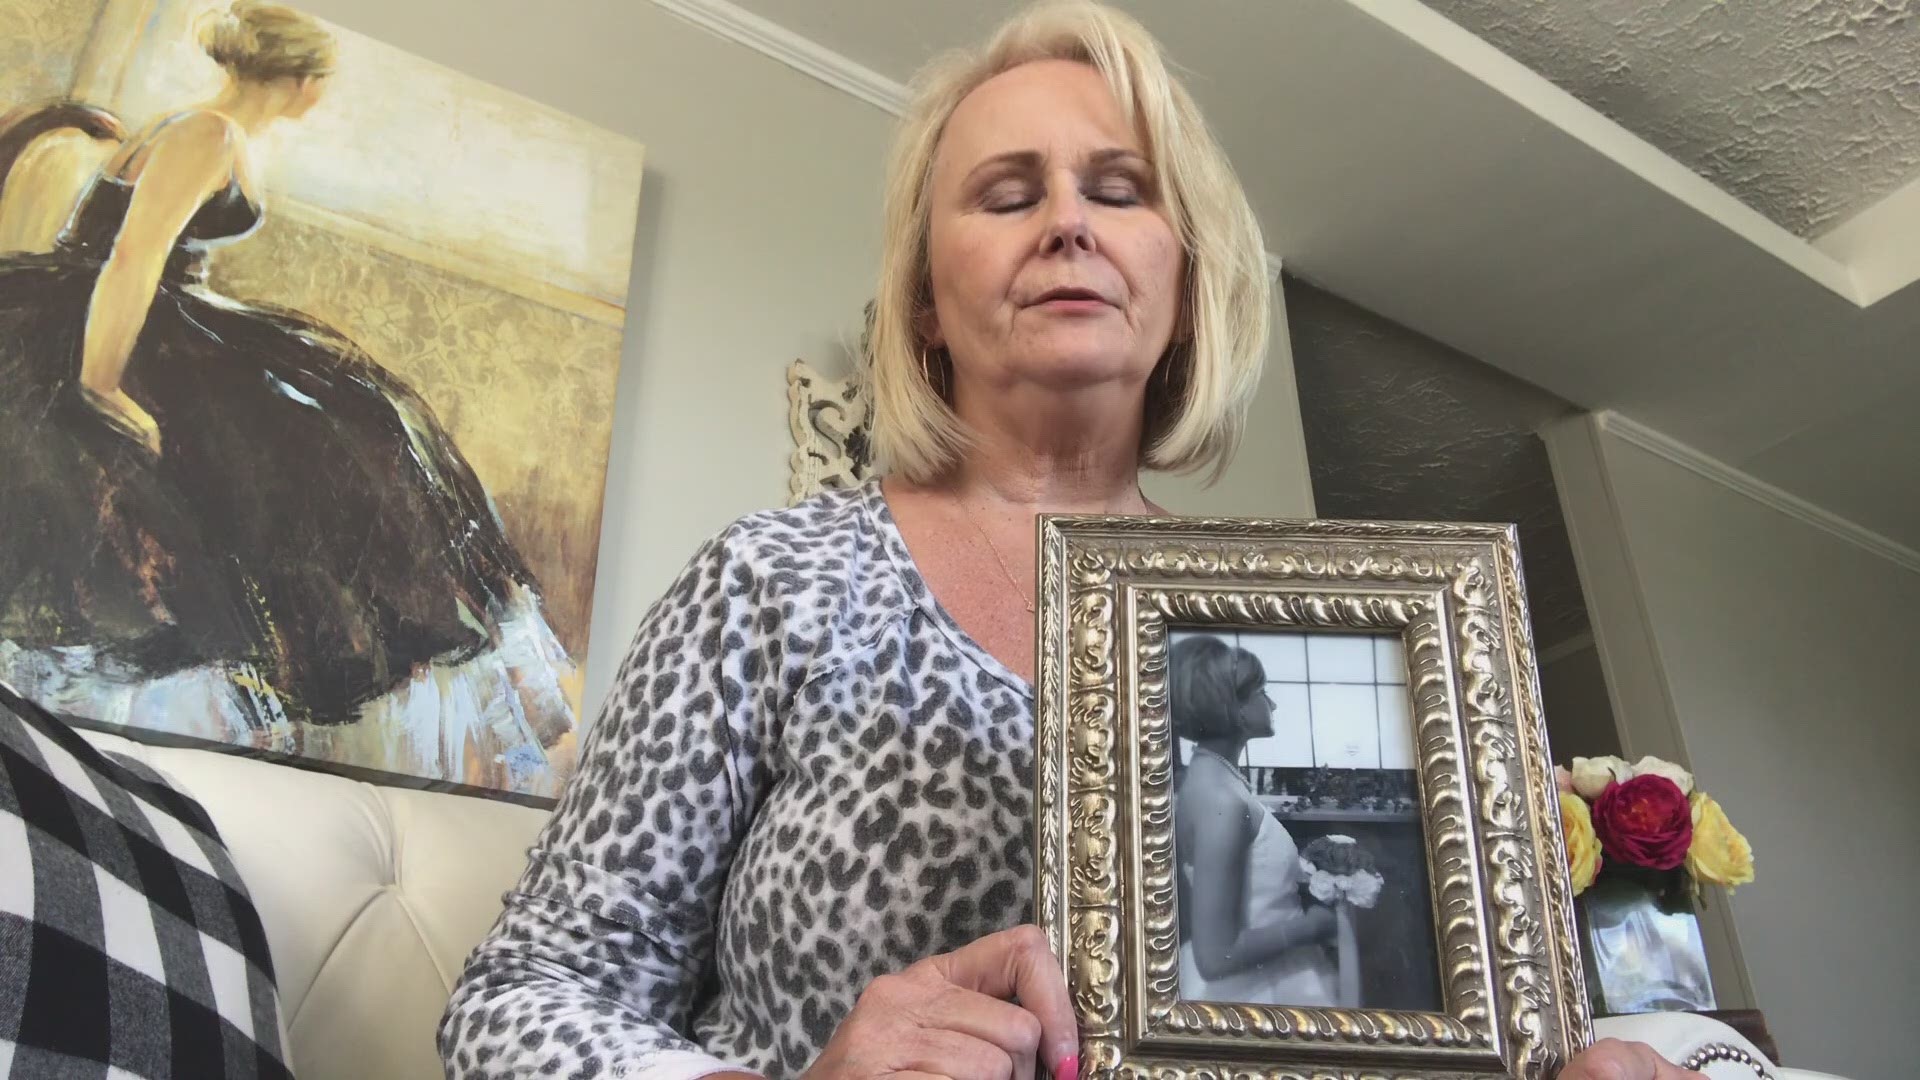 Tina Gregg lost her daughter on October 15, 2011. Nine years later she wants to make sure other victims get stronger rights in the constitution.